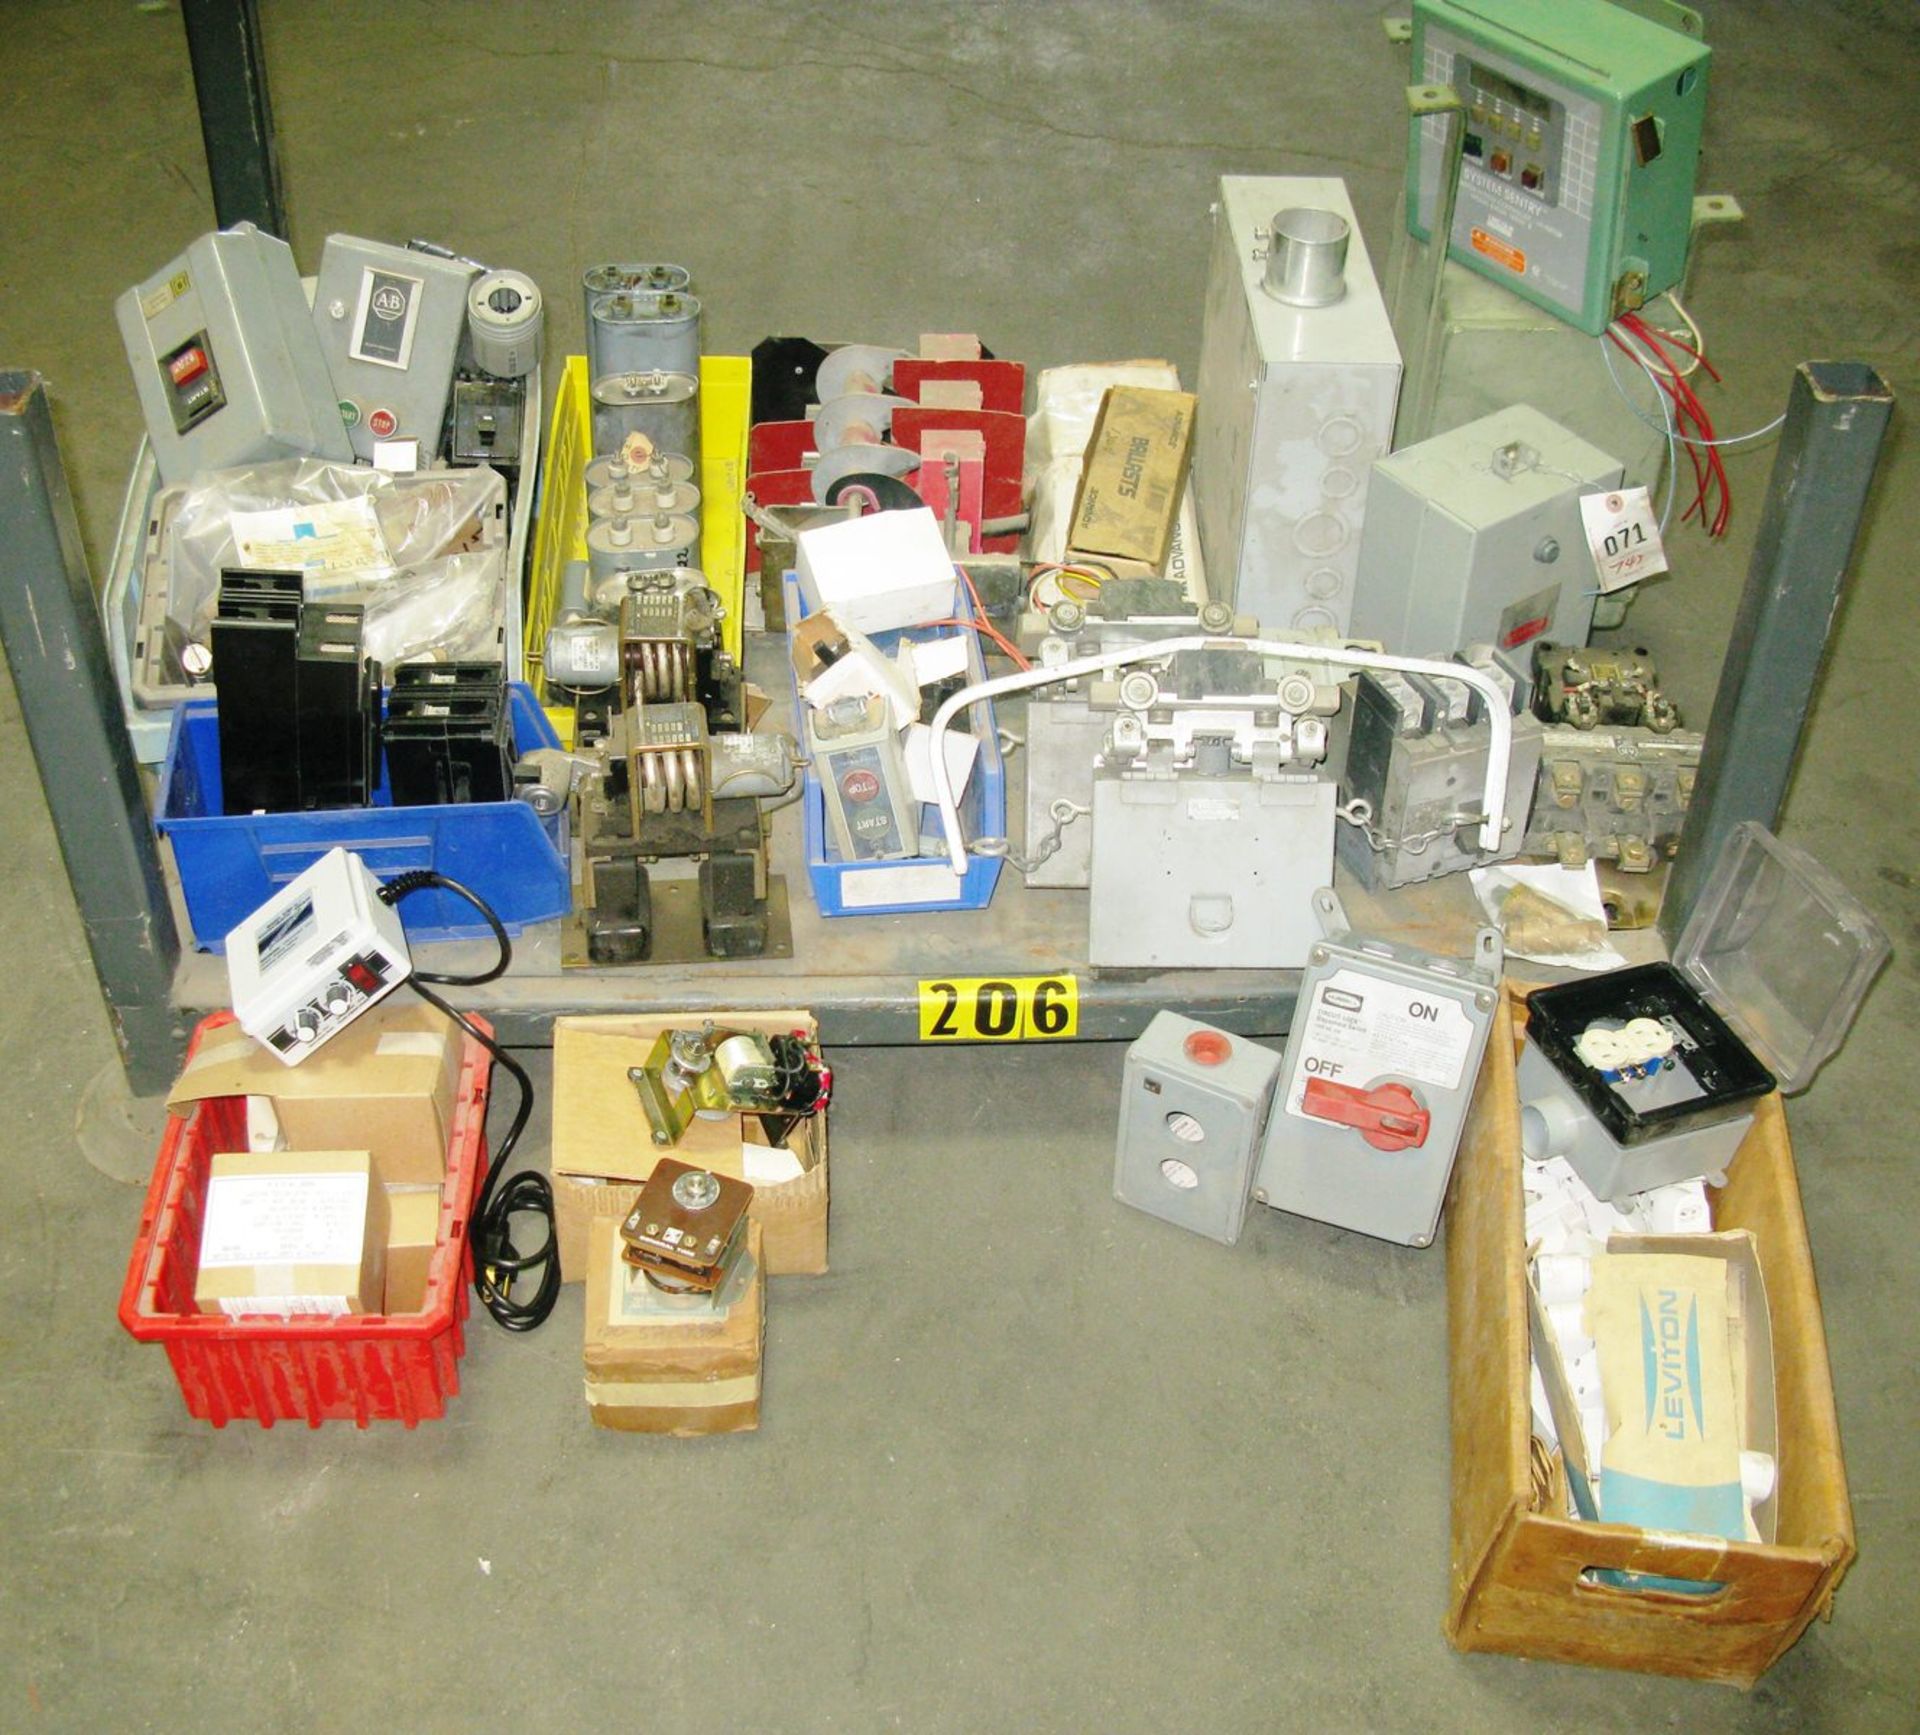 Circuit Breakers, Ballasts, Fuses, Lubrication Controller, Switches, Economatic Drains